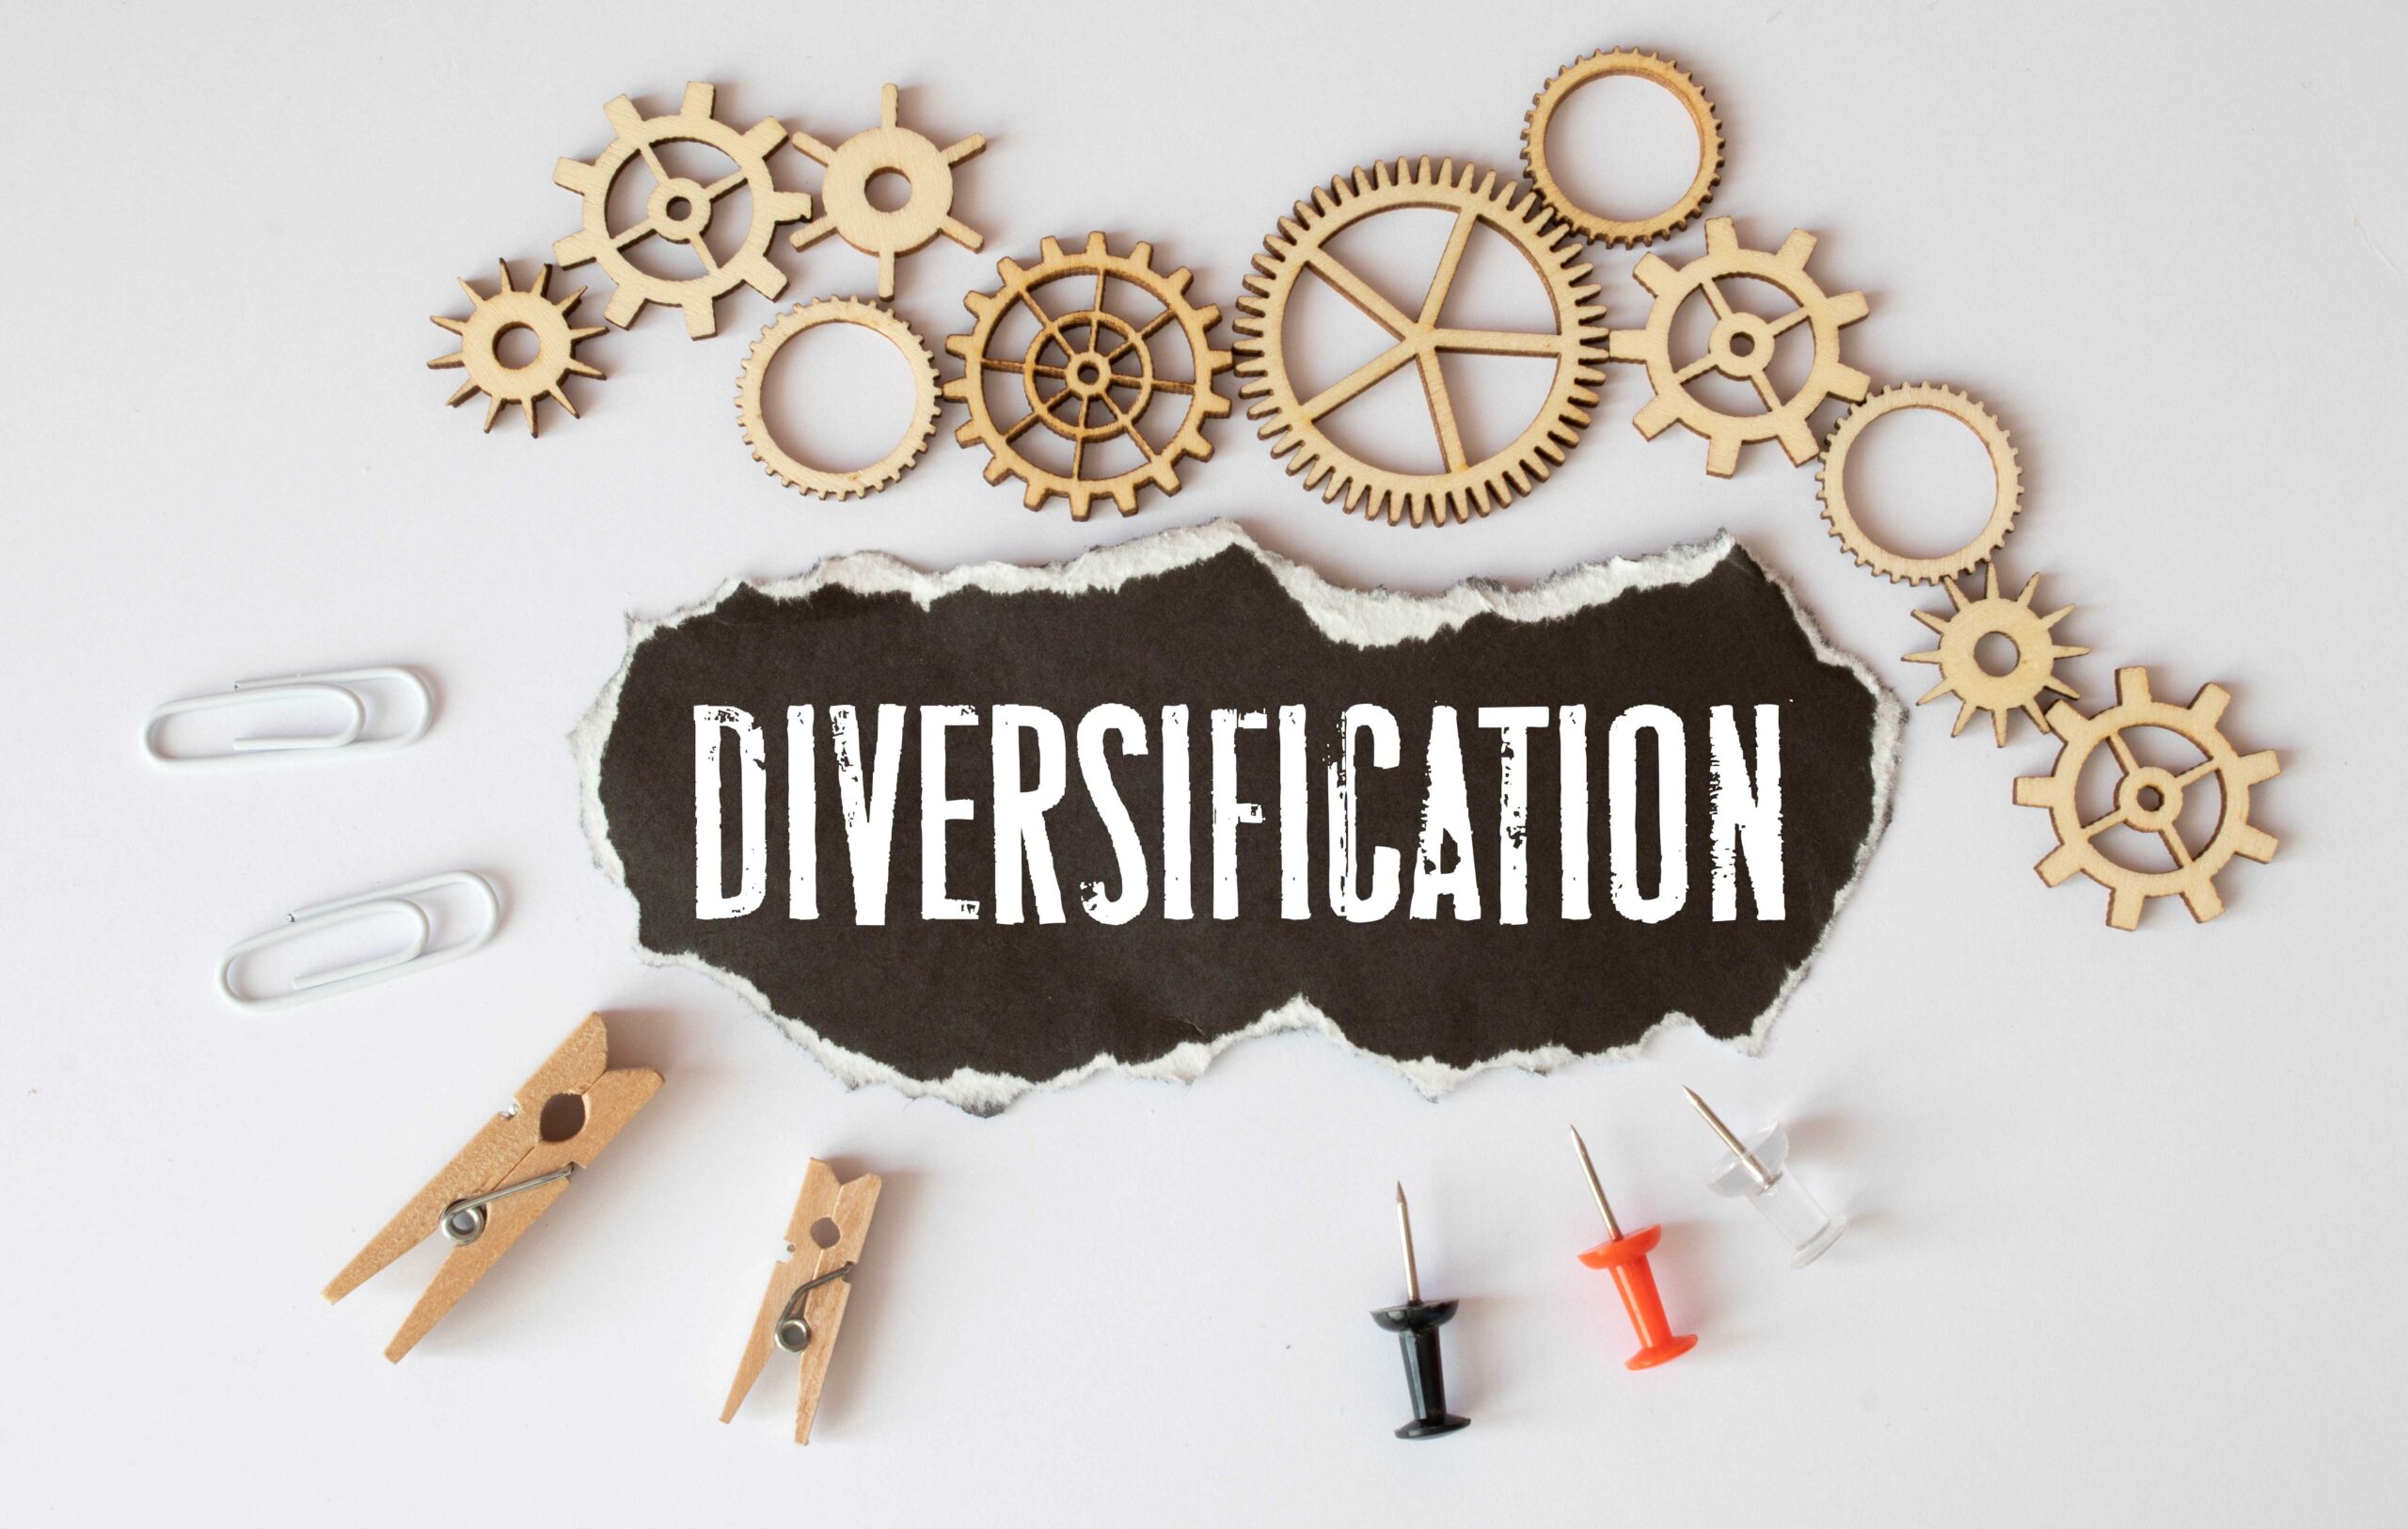 'Diversification' typed on paper surrounded by wooden cogs. paperclips, pegs and pins - the importance of diversification